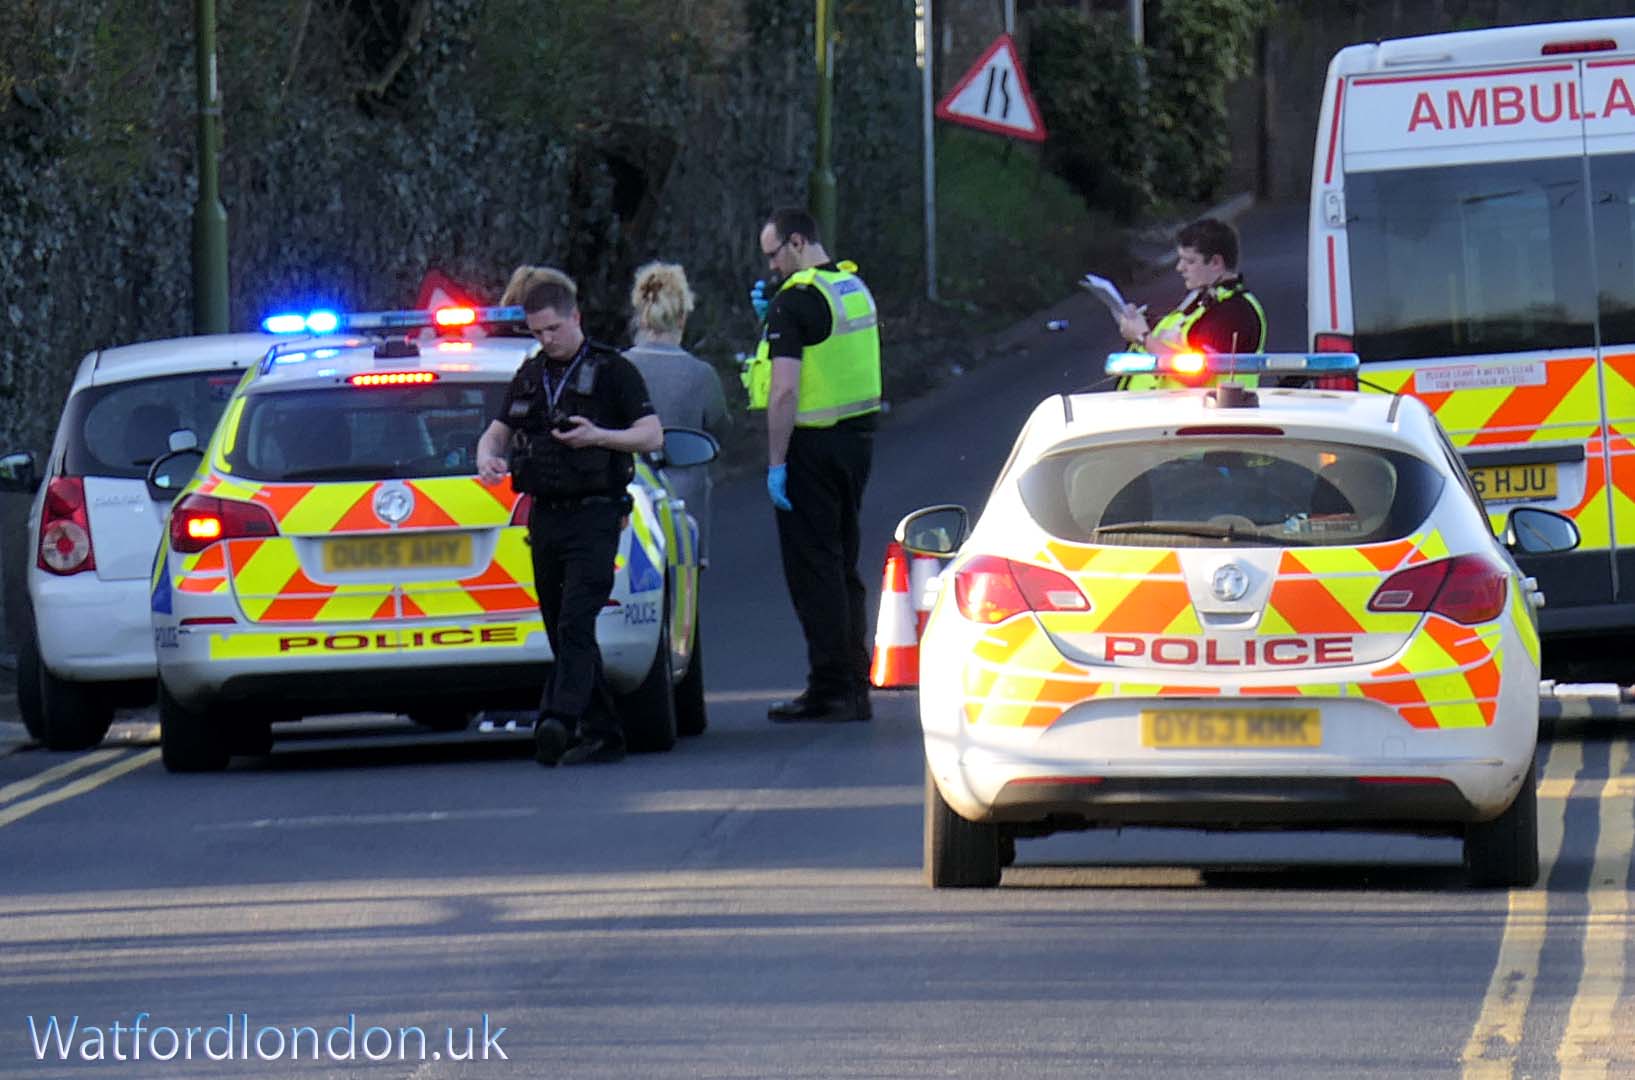 Hertfordshire Police were still at the scene into the late evening as forensics continued the investigation.